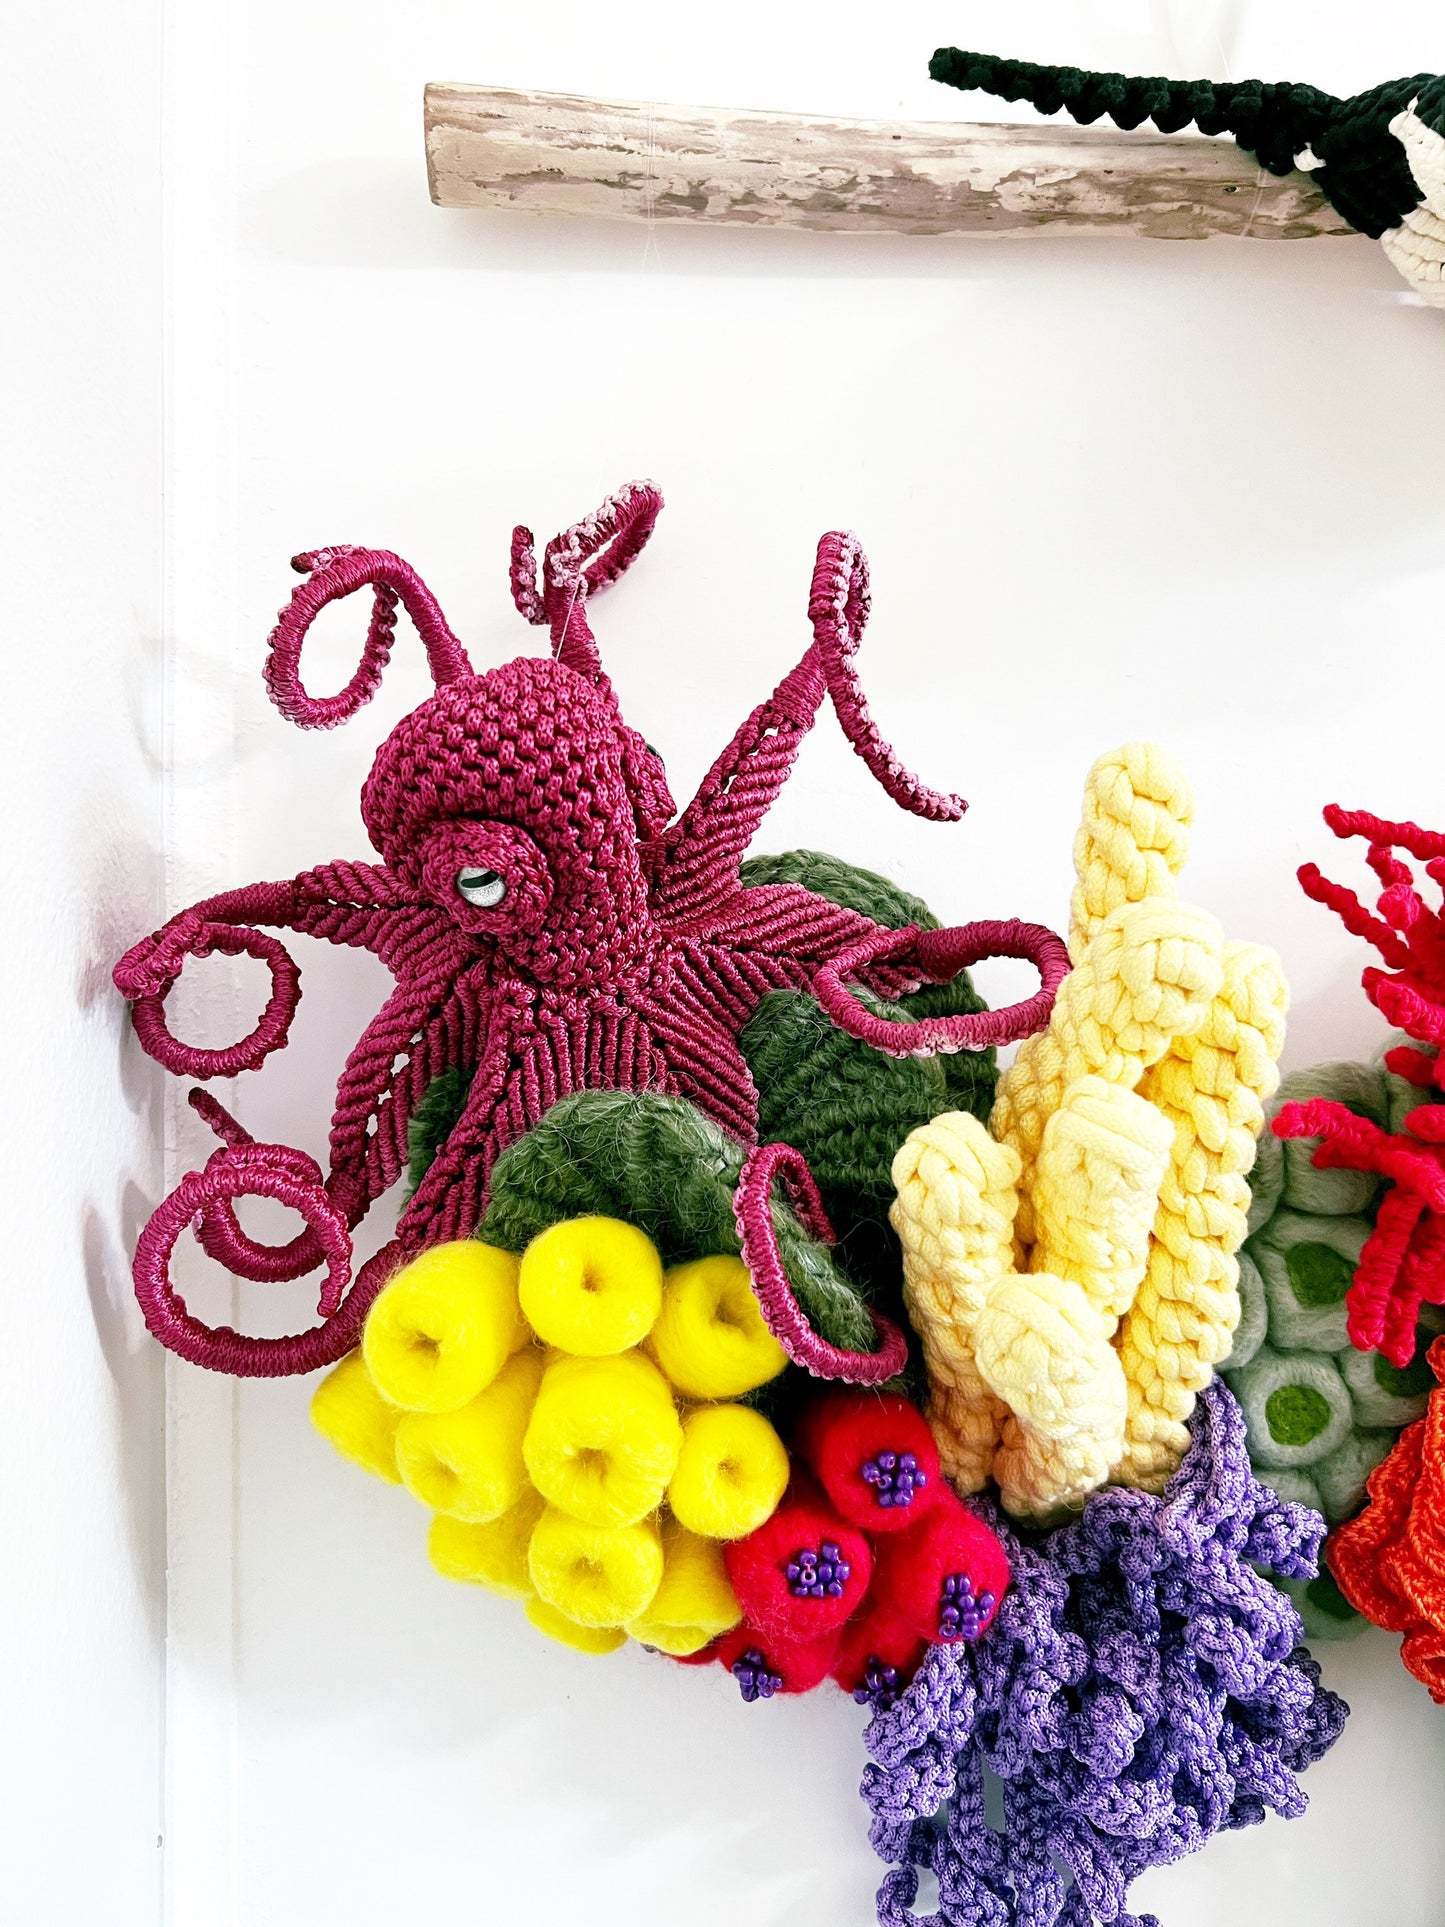 COMMISSION ONLY //Commission order Small Macrame Ocean art/Coral reef art/ Macrame barrier reef/macrame corals/macrame fish/ Macrame Octopus